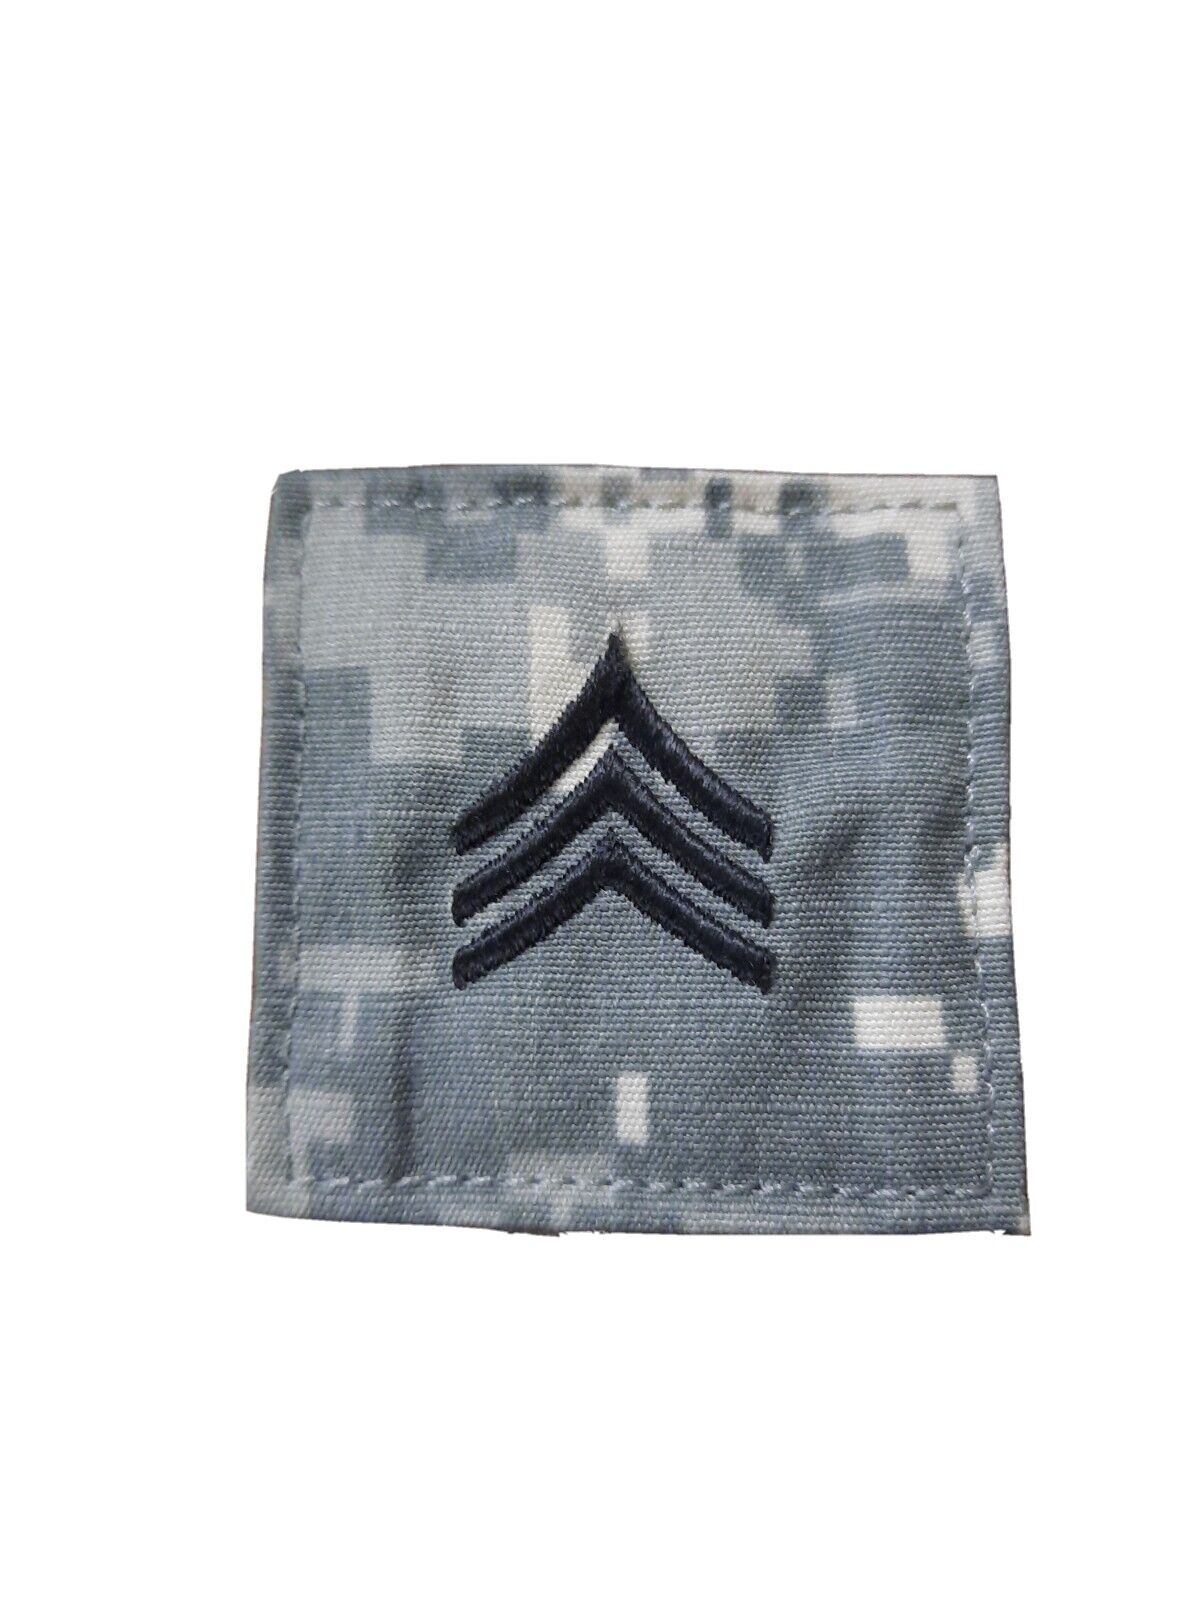 US Army ACU Rank E-5 Sergeant Patch w/ Hook Fastener Uniform Ready Made in USA